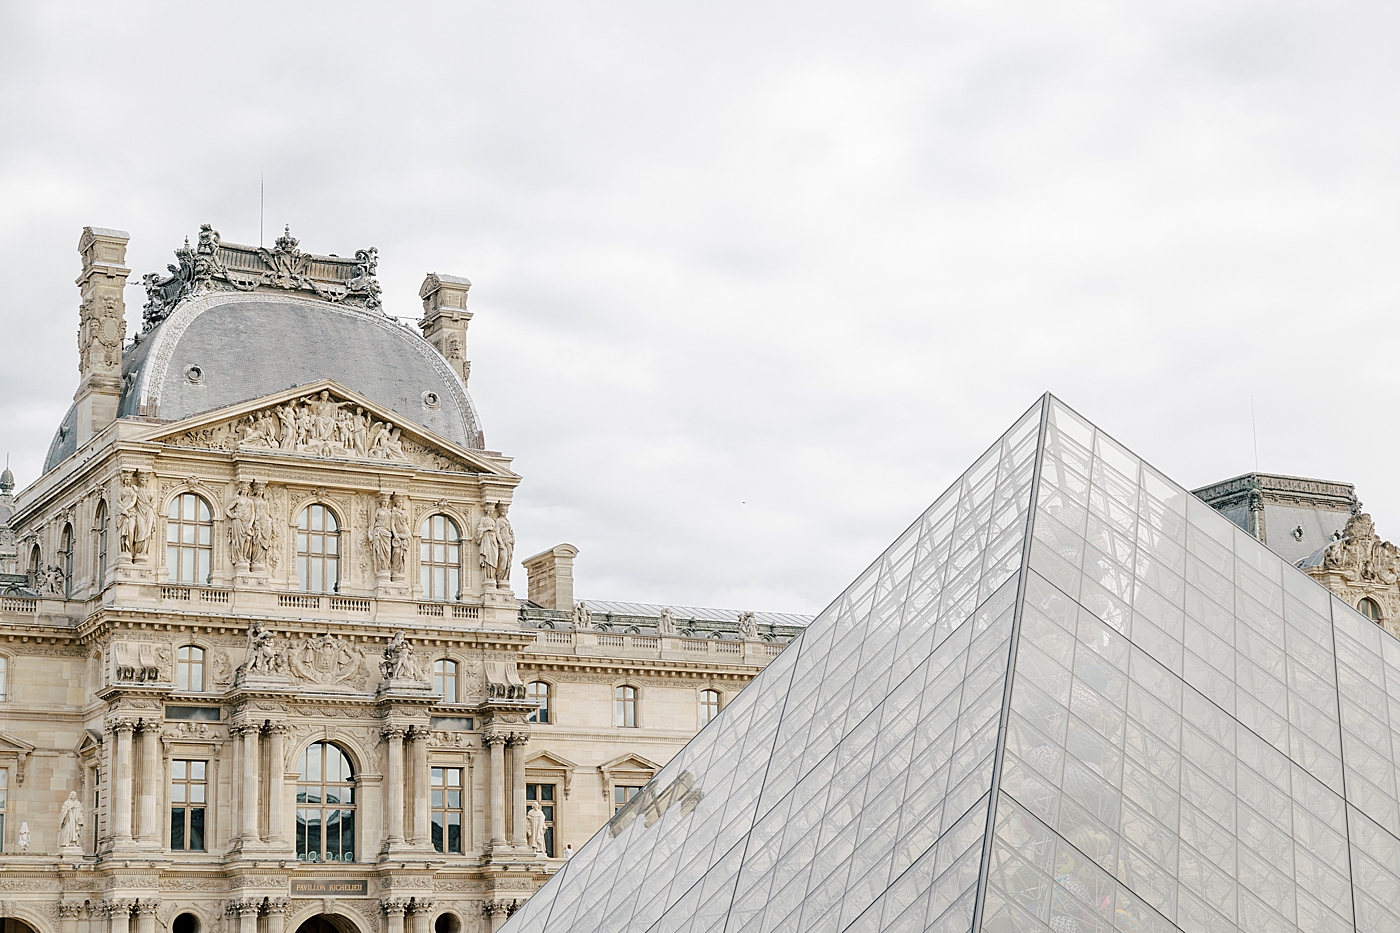 Location imagery of the outside of the Louvre in Paris | Image by Hope Helmuth Photography